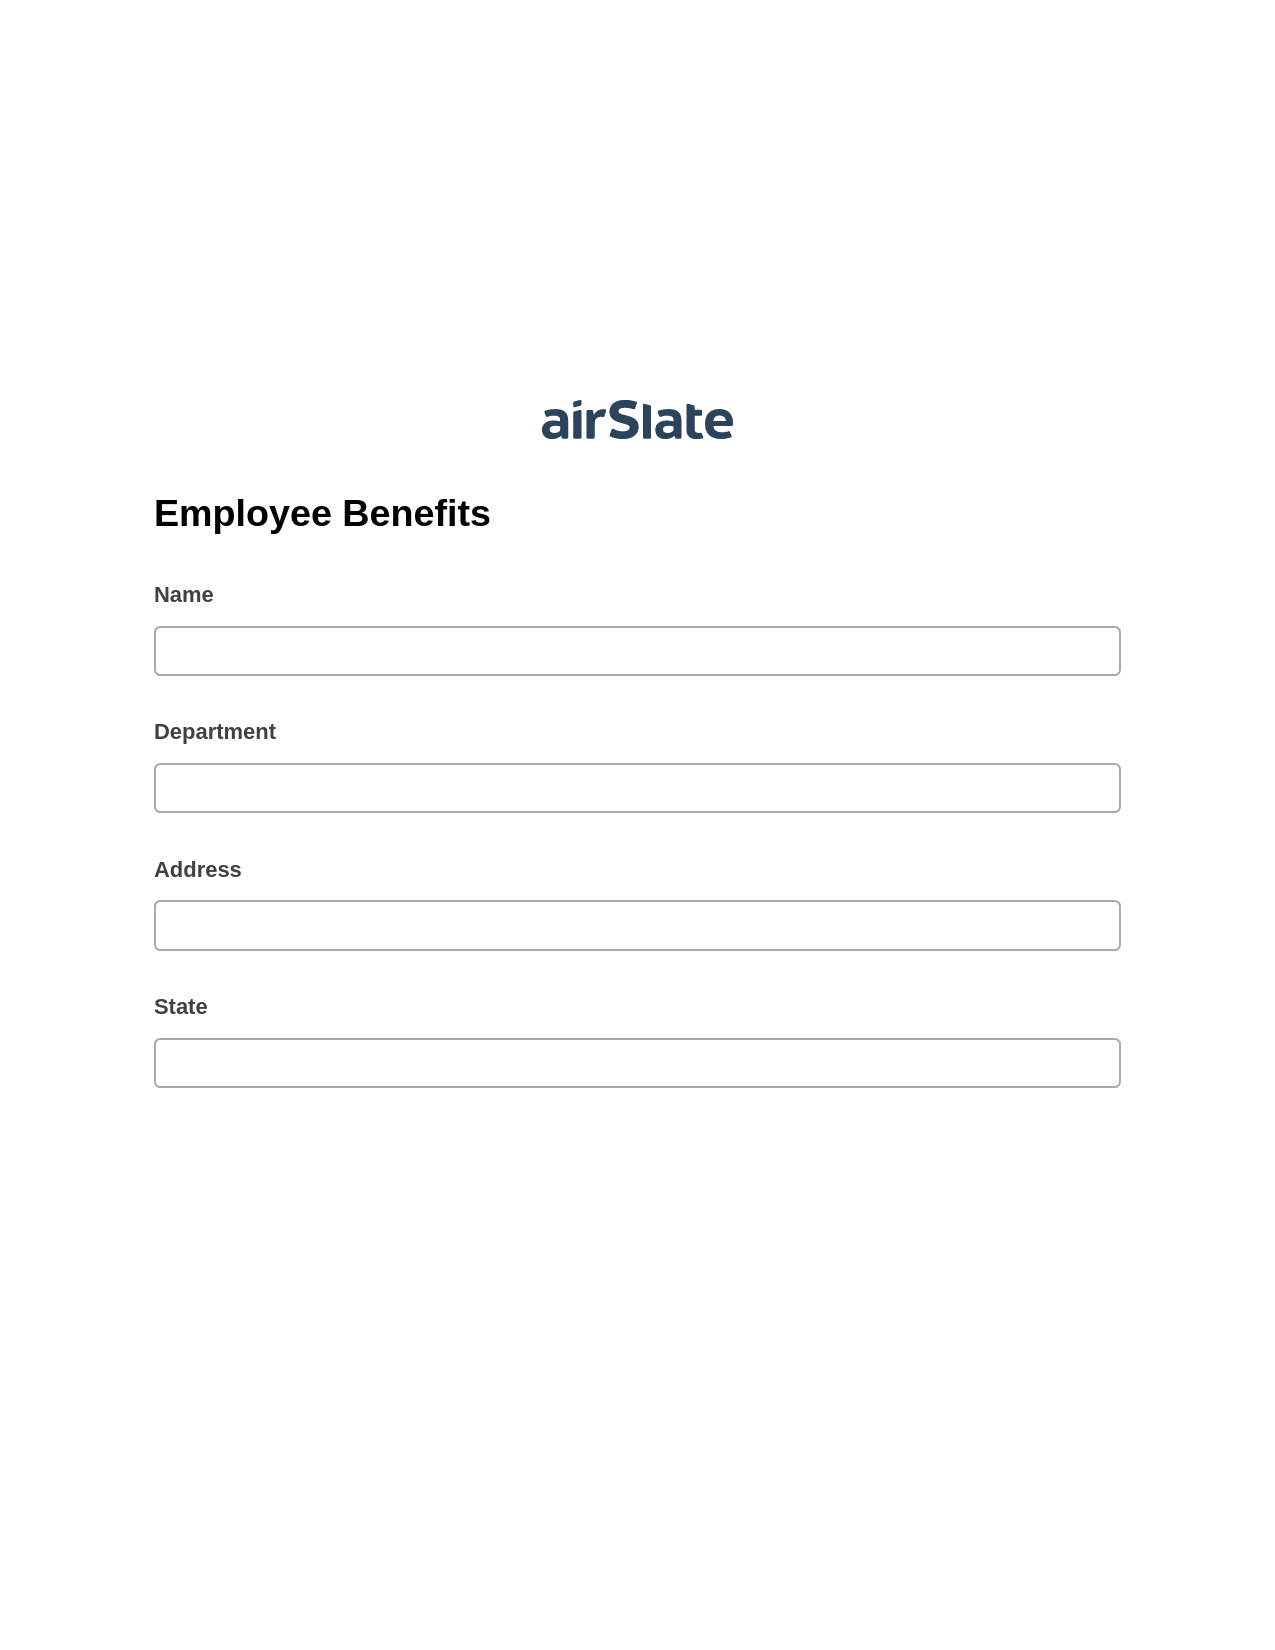 Employee Benefits Pre-fill from another Slate Bot, Update Salesforce Record Bot, Export to Formstack Documents Bot